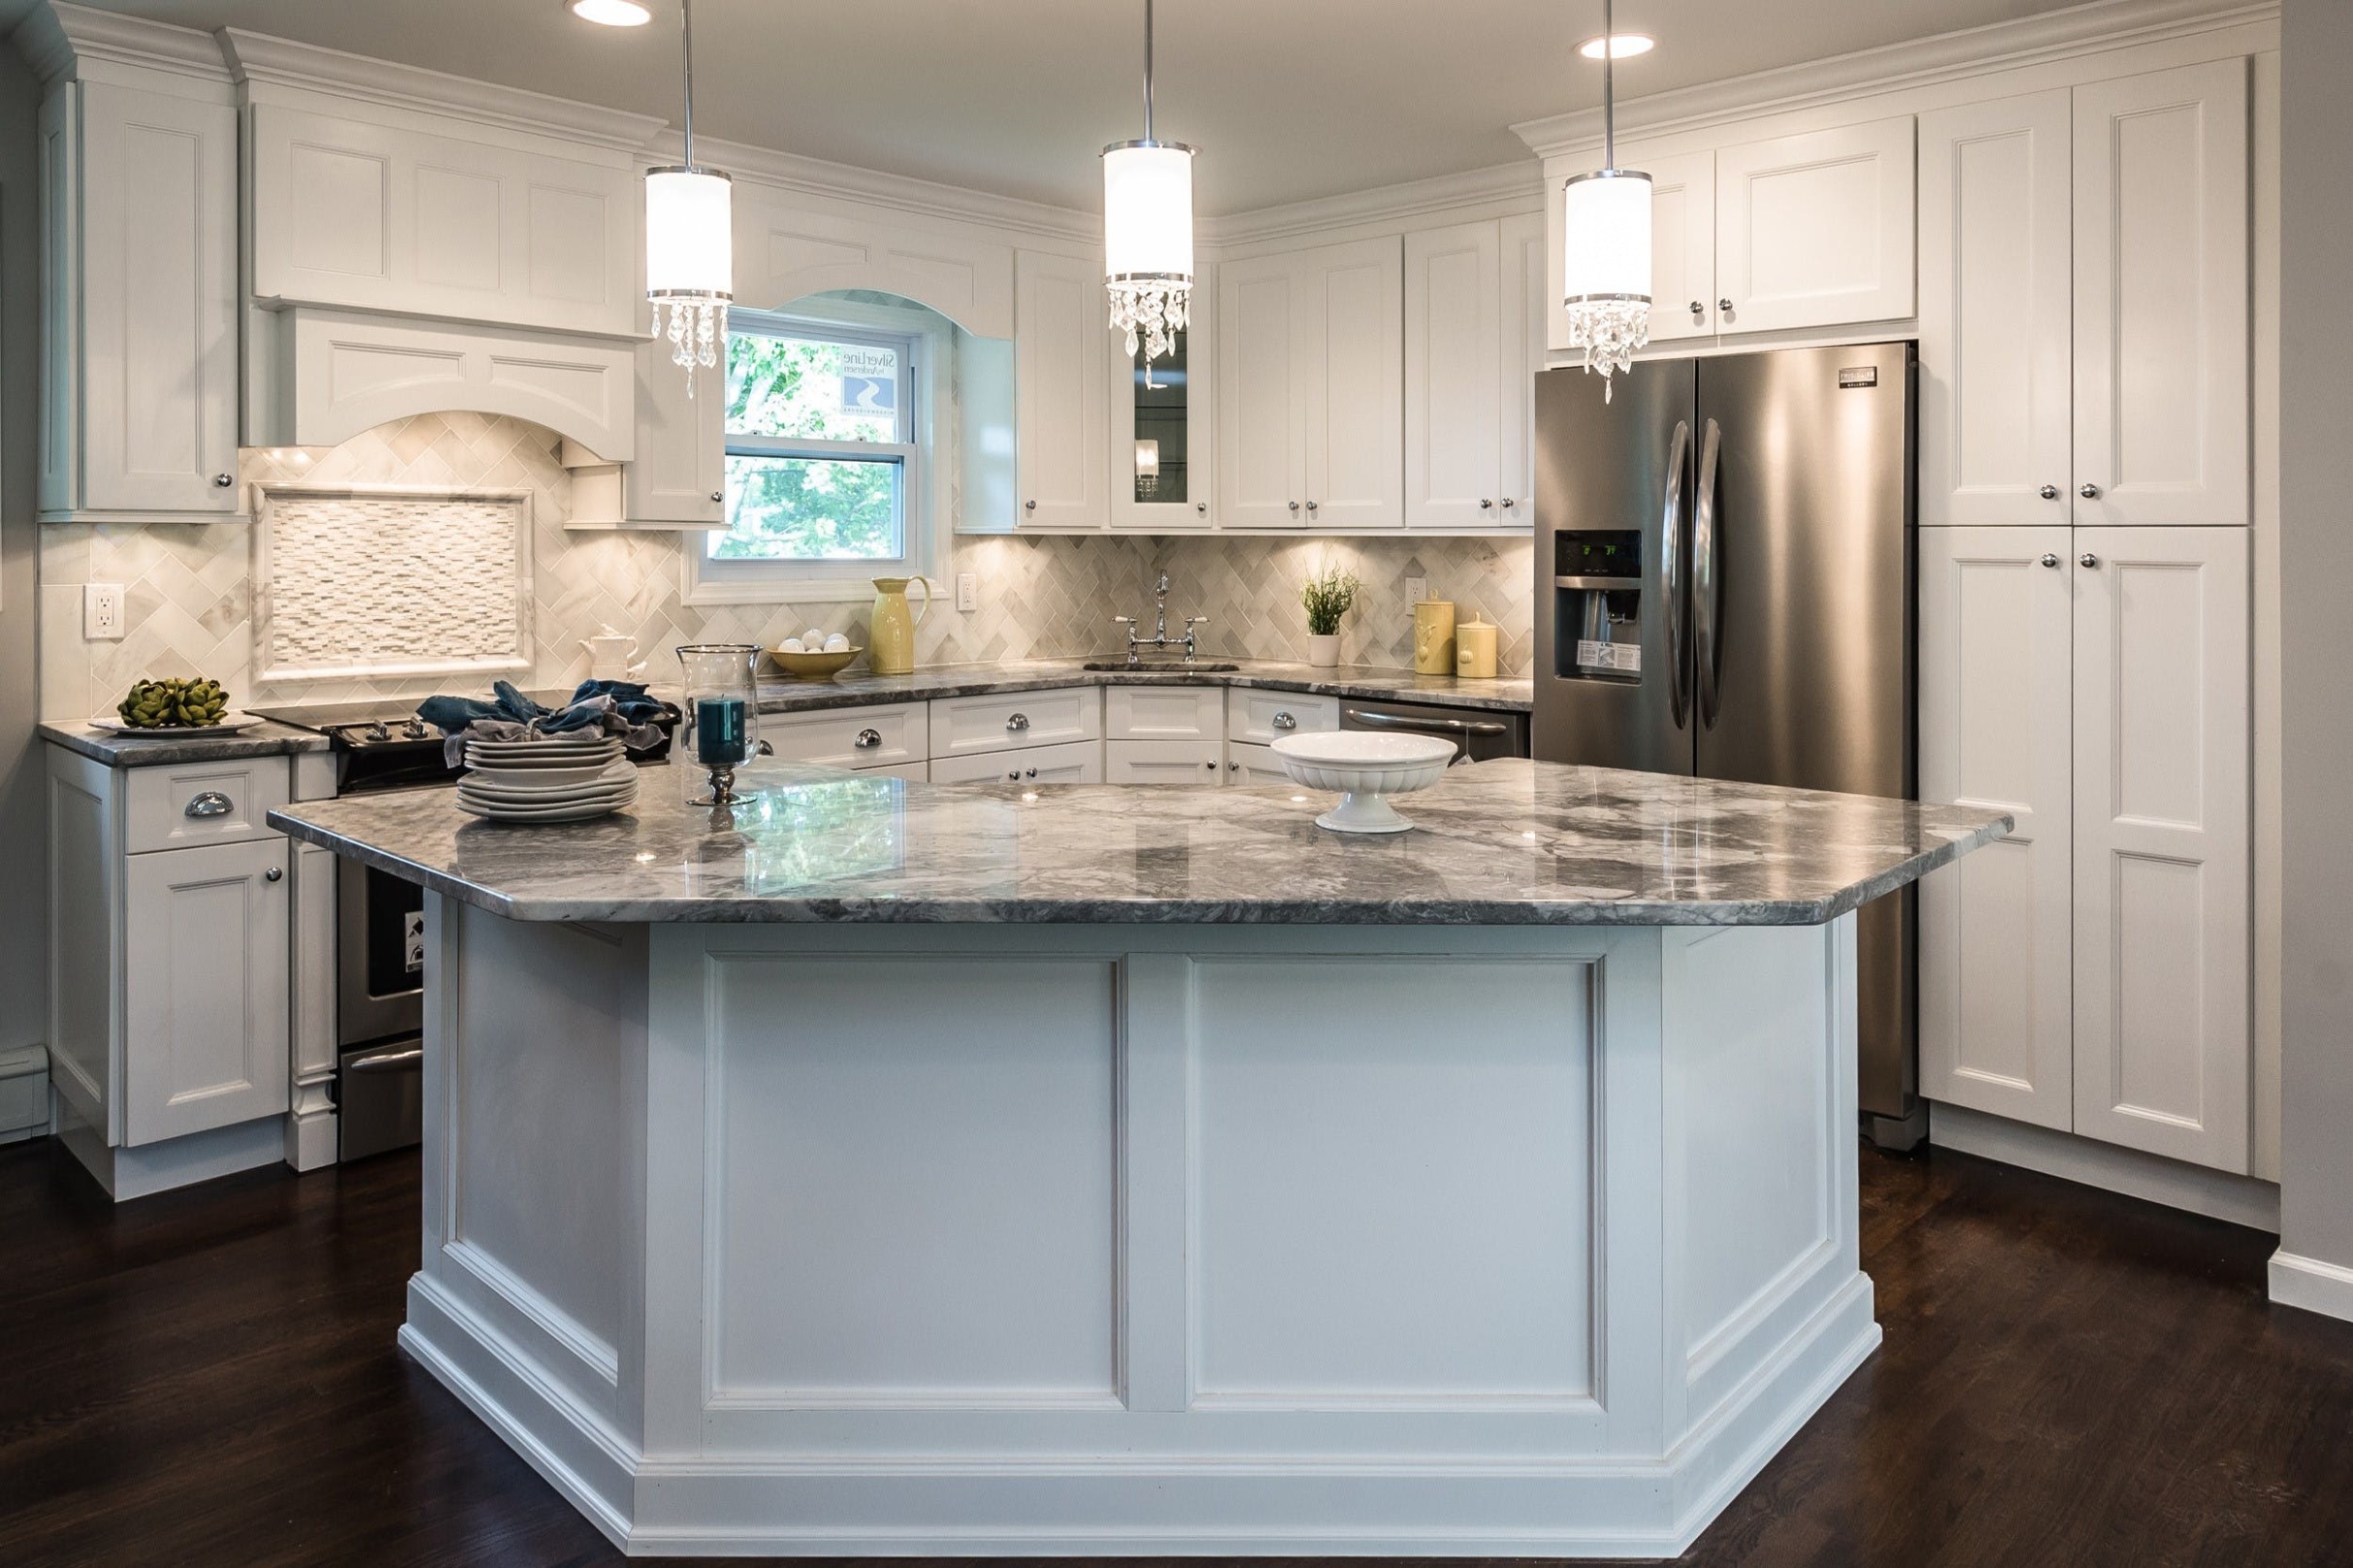 How to pair kitchen countertops and cabinets - what cabinet color goes with white countertops?